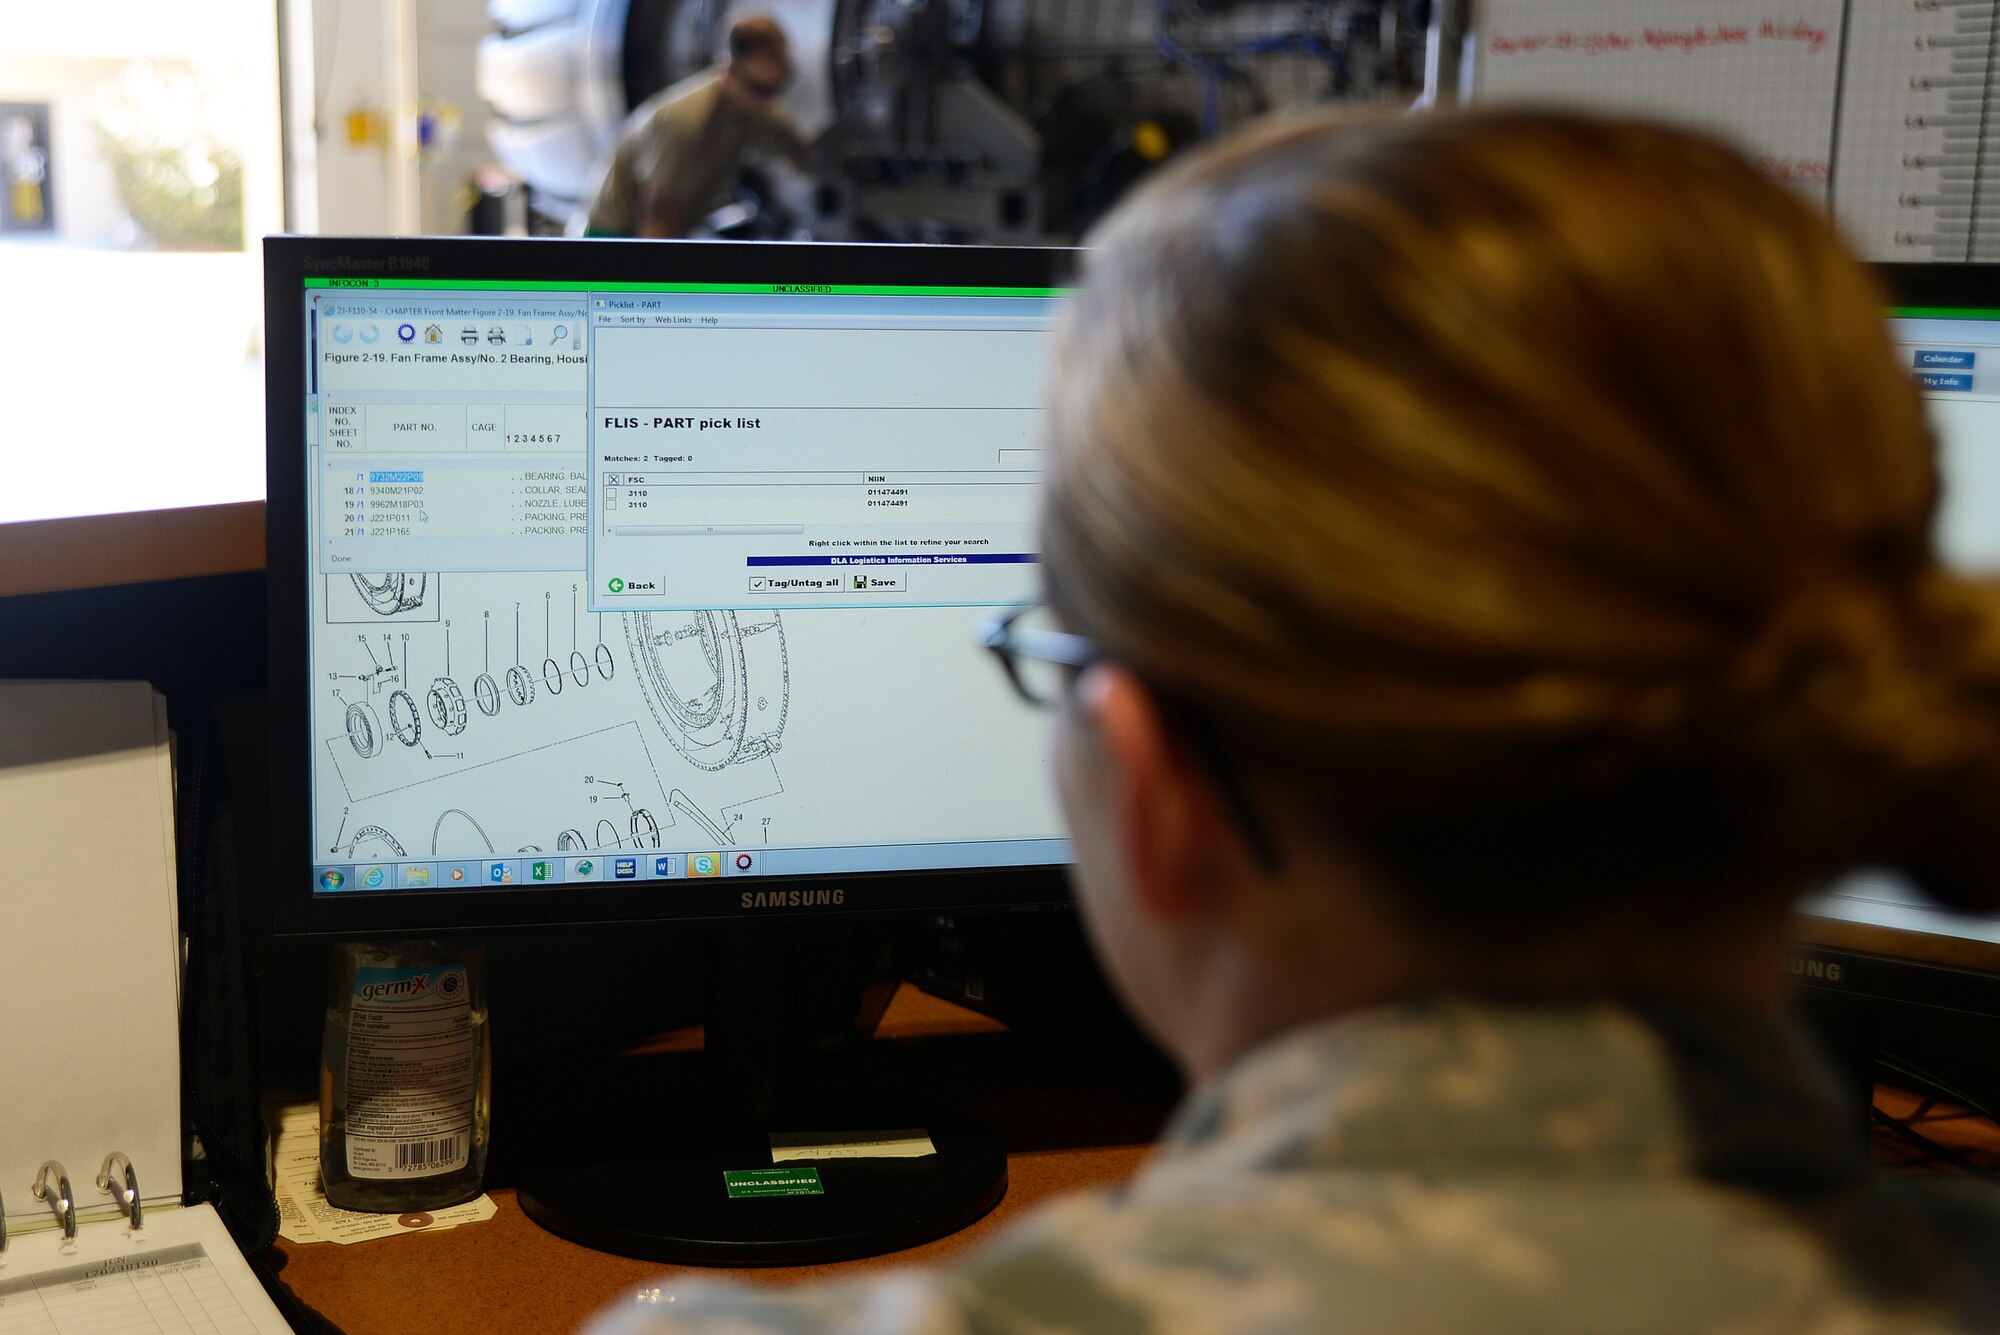 U.S. Air Force Staff Sgt. Elizabeth Tapley, 20th Component Maintenance Squadron (CMS) aerospace propulsion craftsman inputs serially tracked parts into a computer at Shaw Air Force Base, S.C., March 29, 2017. Each part is tracked to ensure 20th CMS Airmen know which parts are being installed onto the F-16CM Fighting Flacon engine. (U.S. Air Force photo by Airman 1st Class BrieAnna Stillman)    